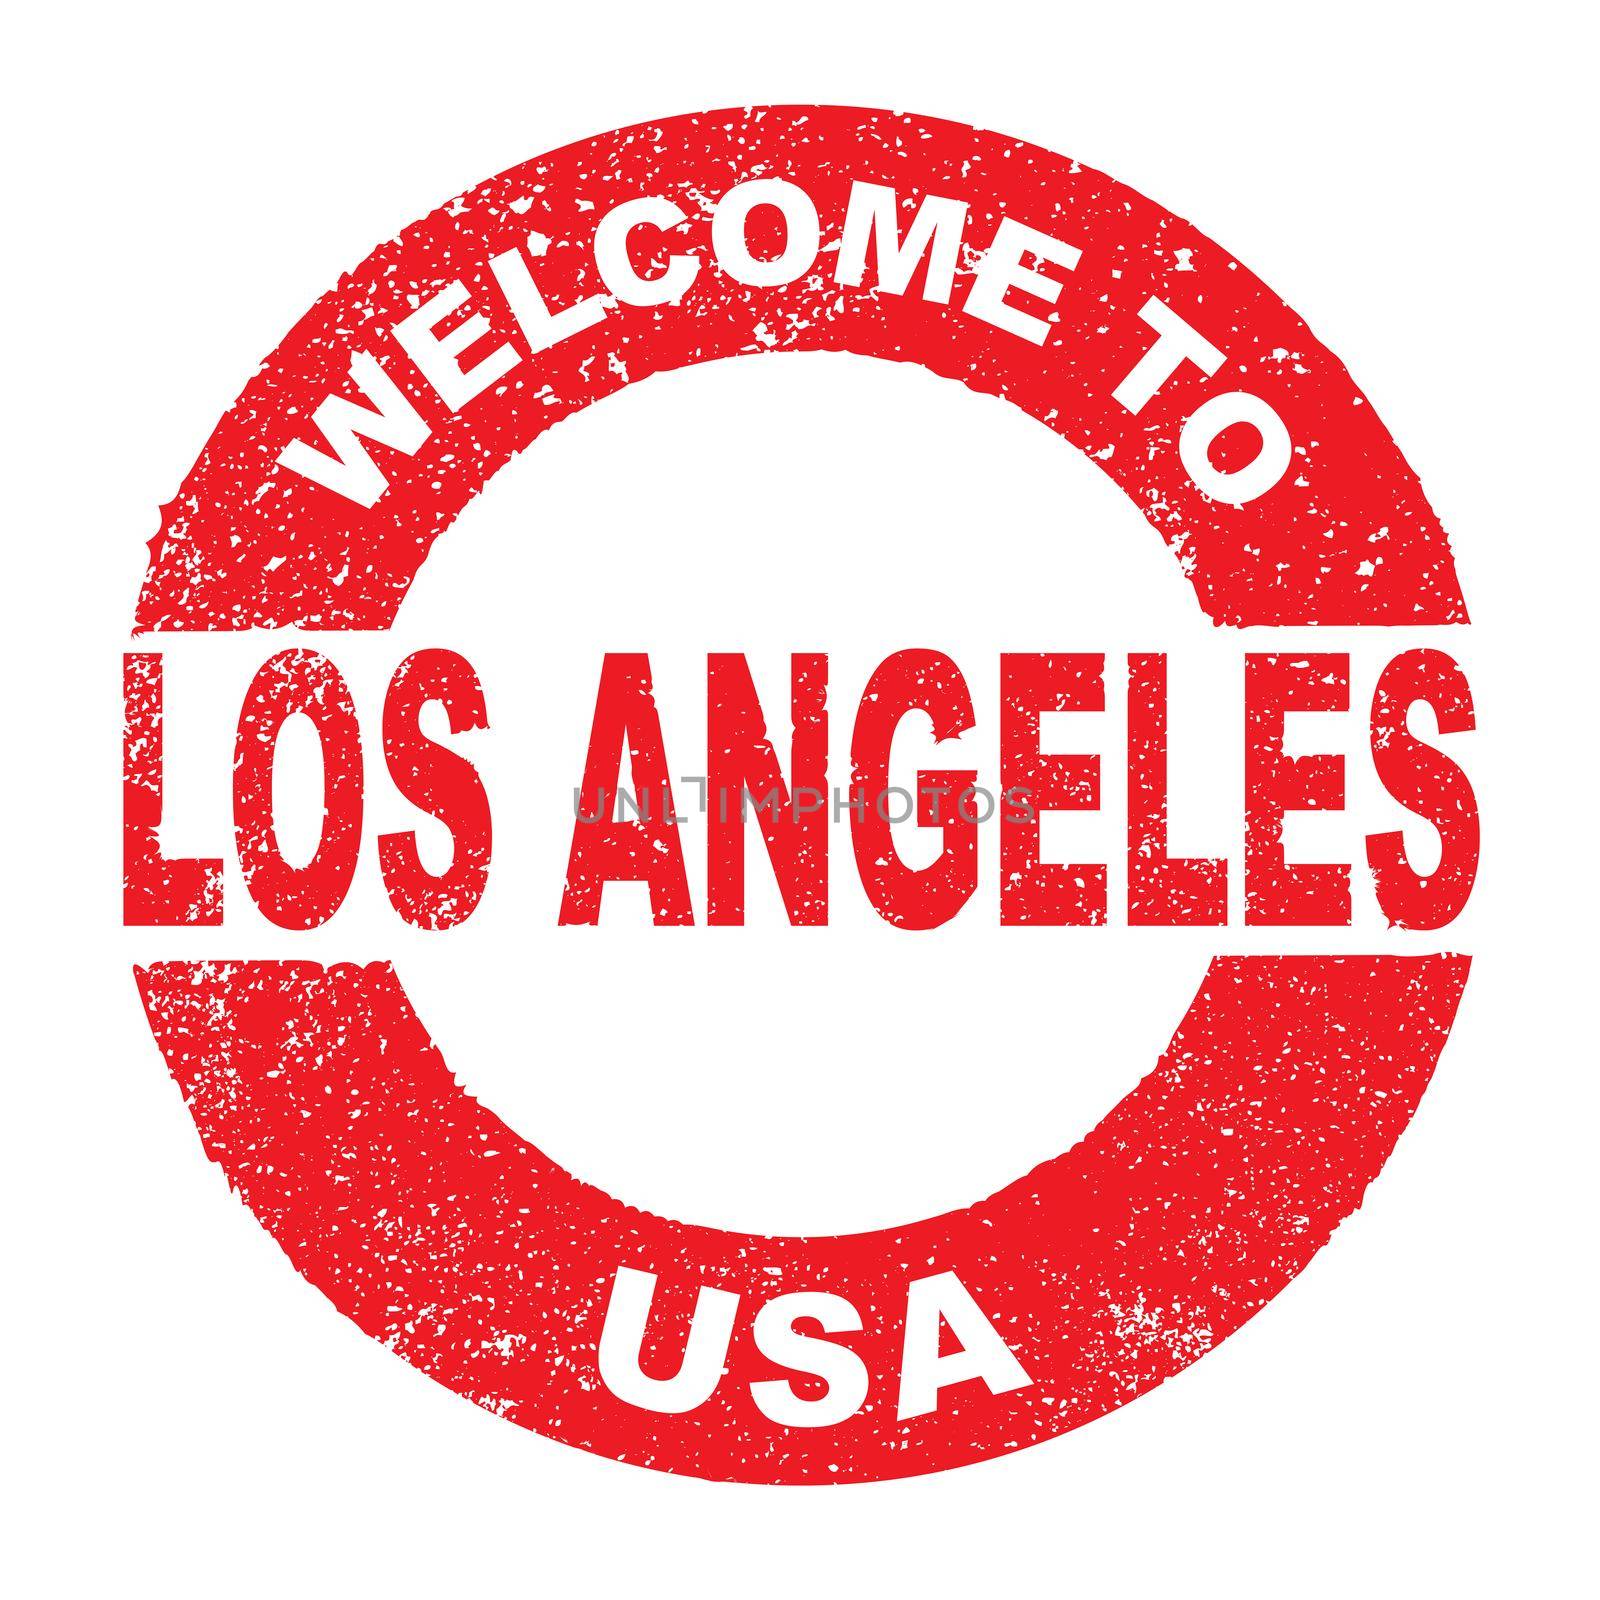 A grunge rubber ink stamp with the text Welcome To Los Angelas USA over a white background